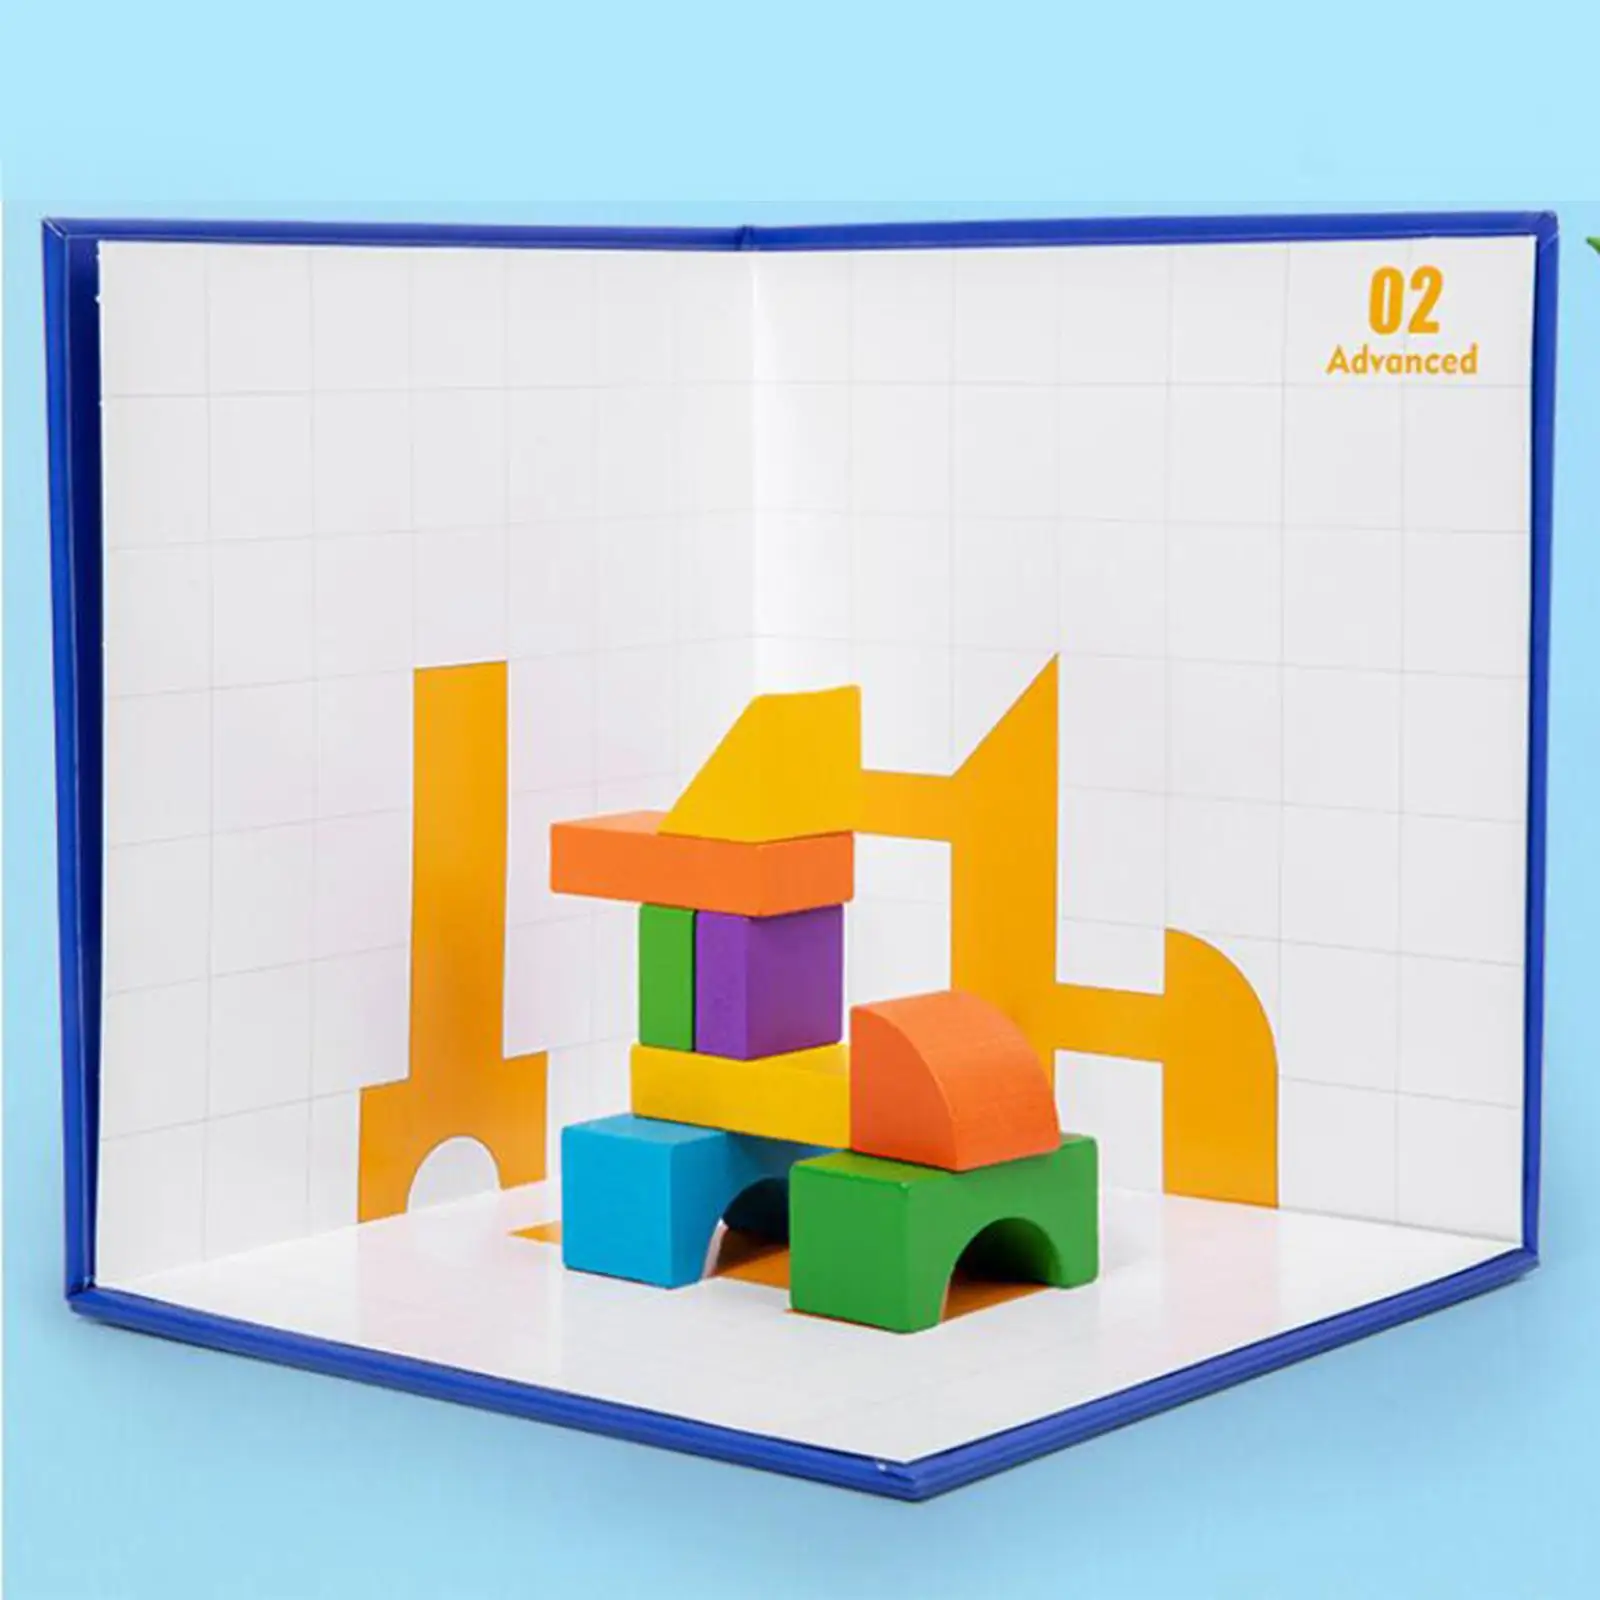 

Wooden Building Block Shape Learning Early Learning Space Stacking Game for Birthday Gift Girls Boys Preschool Toddlers Kids